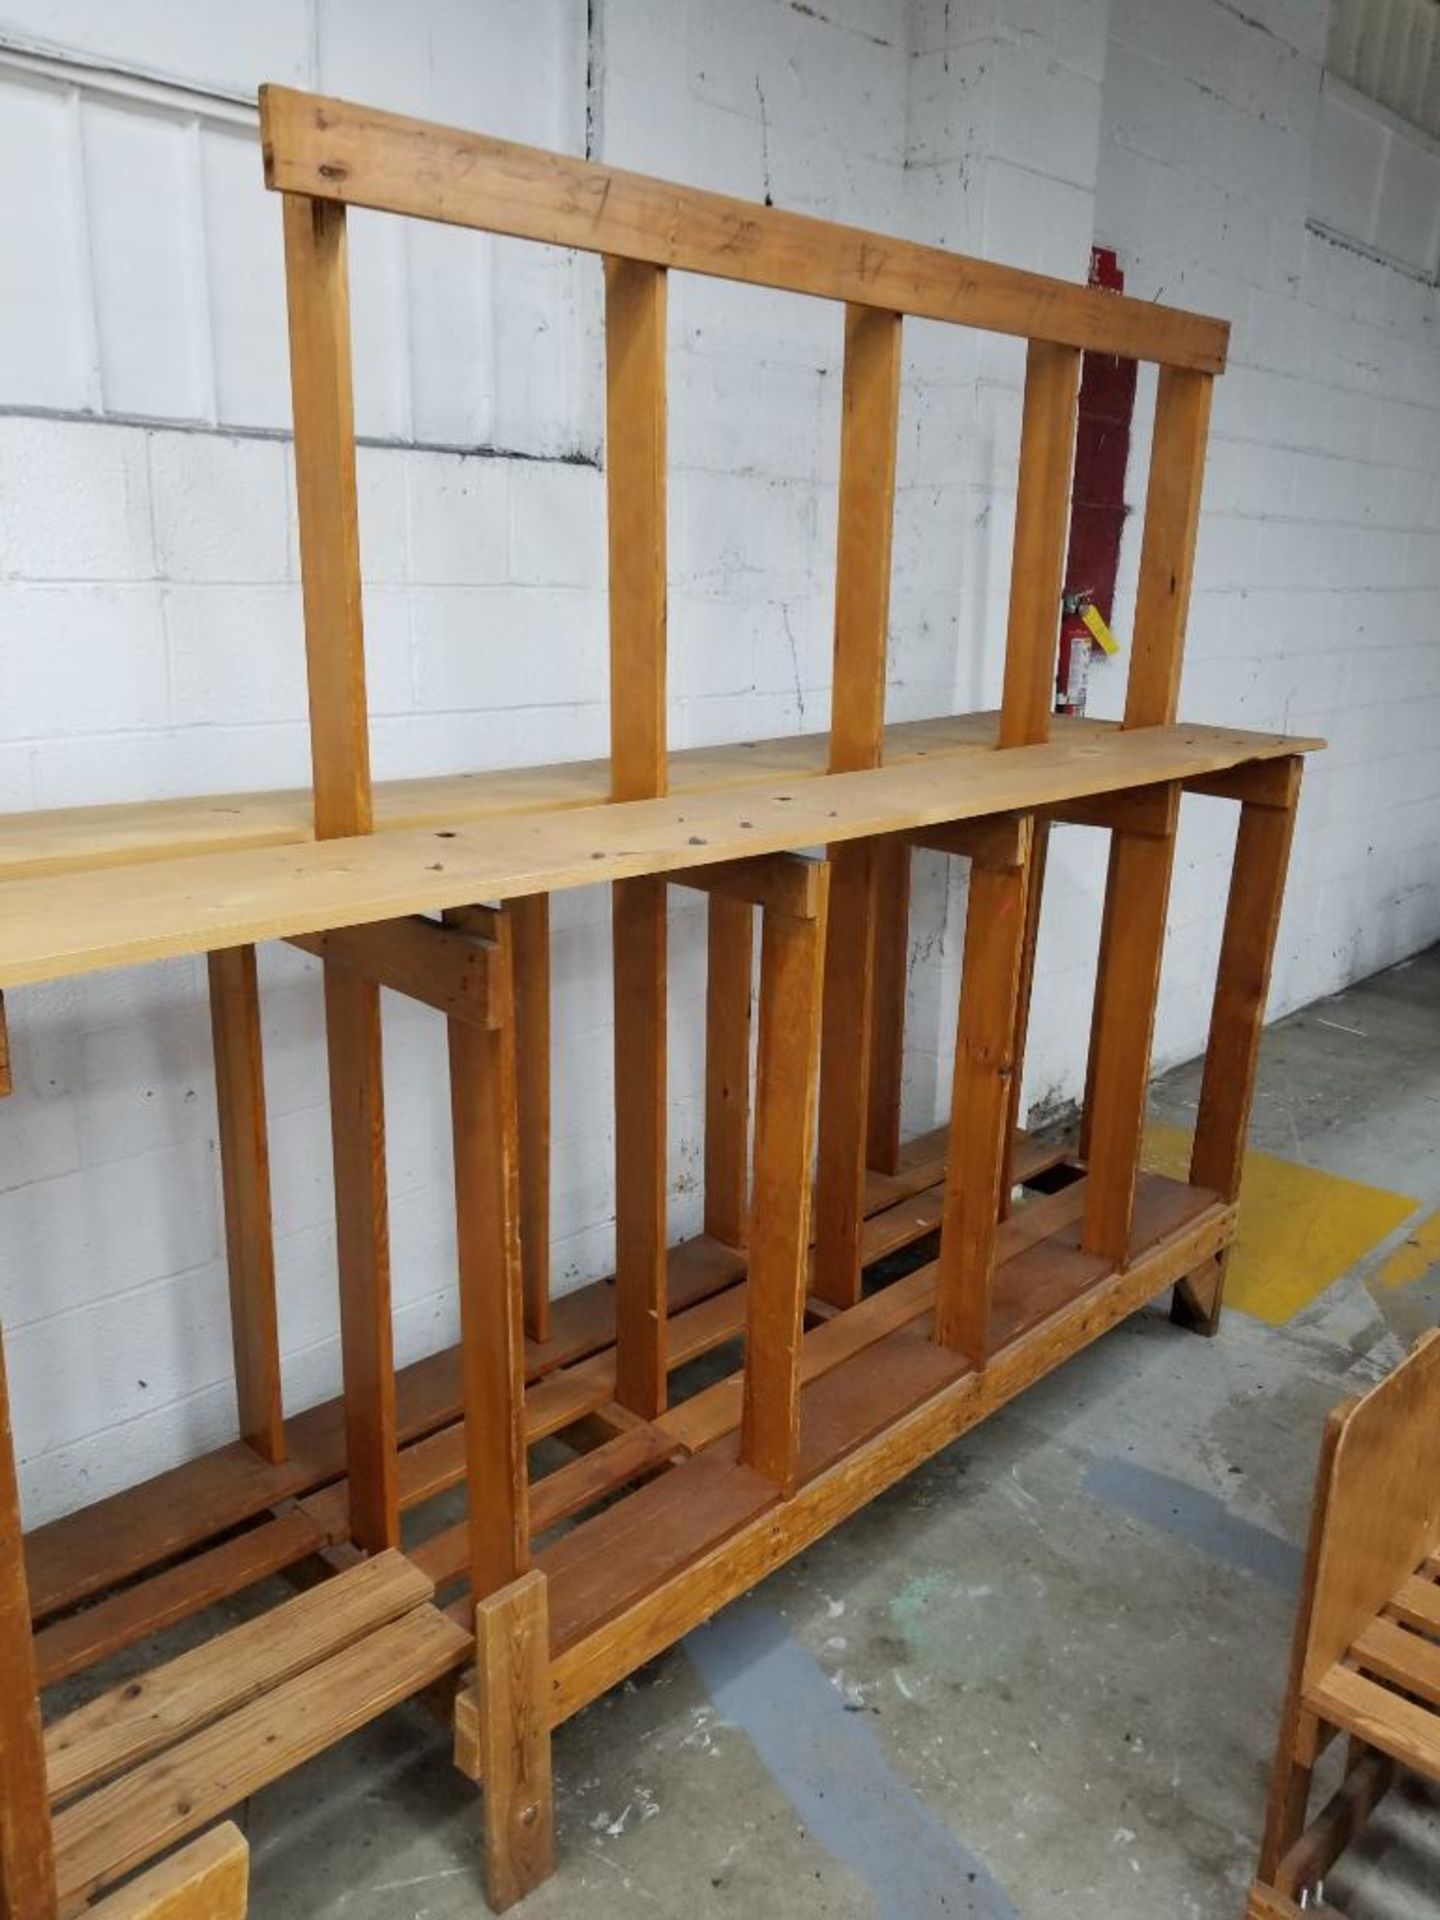 Wooden racking. - Image 3 of 3